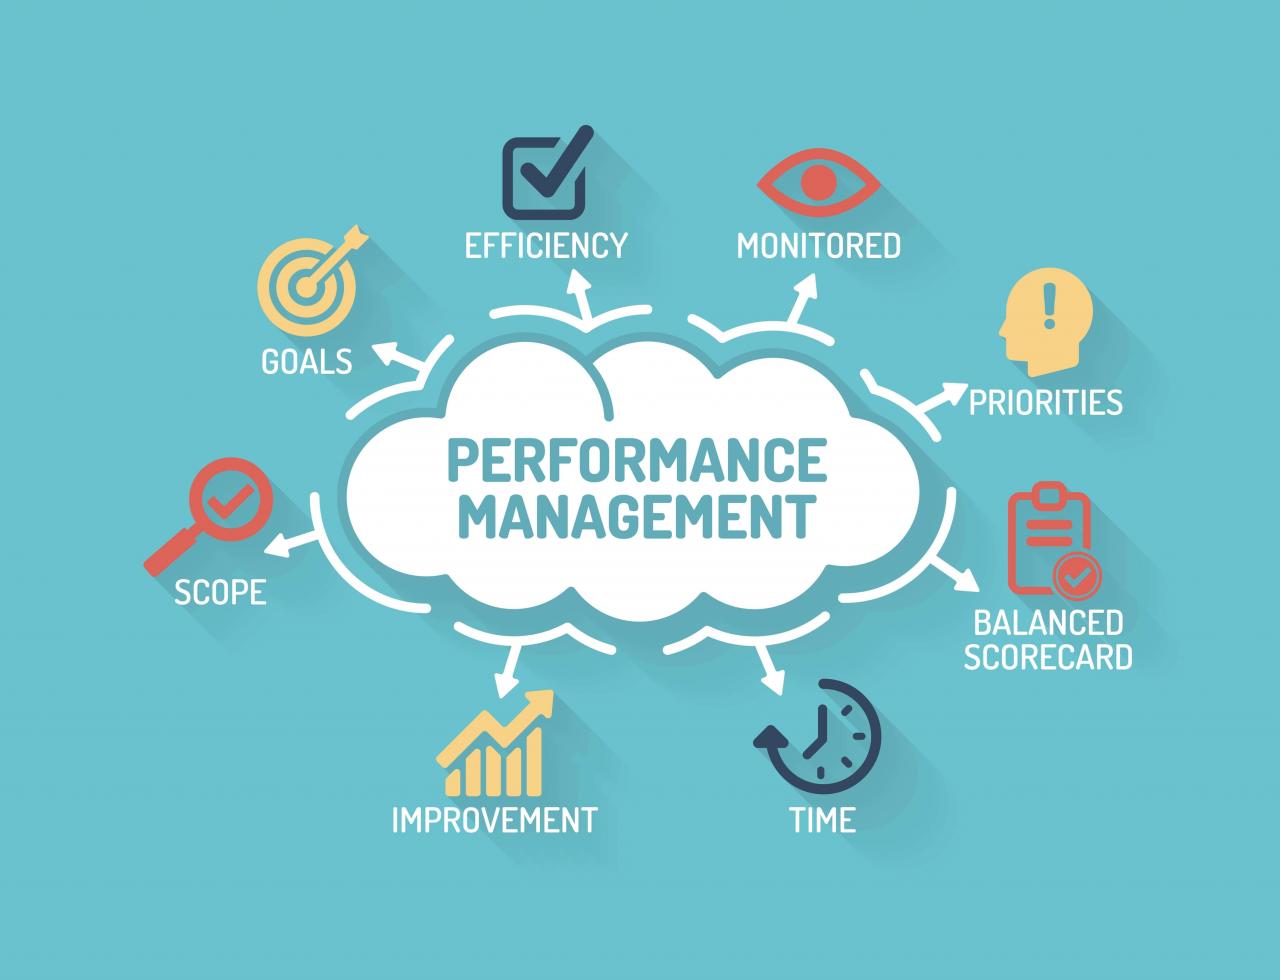 Components of an effective performance management system